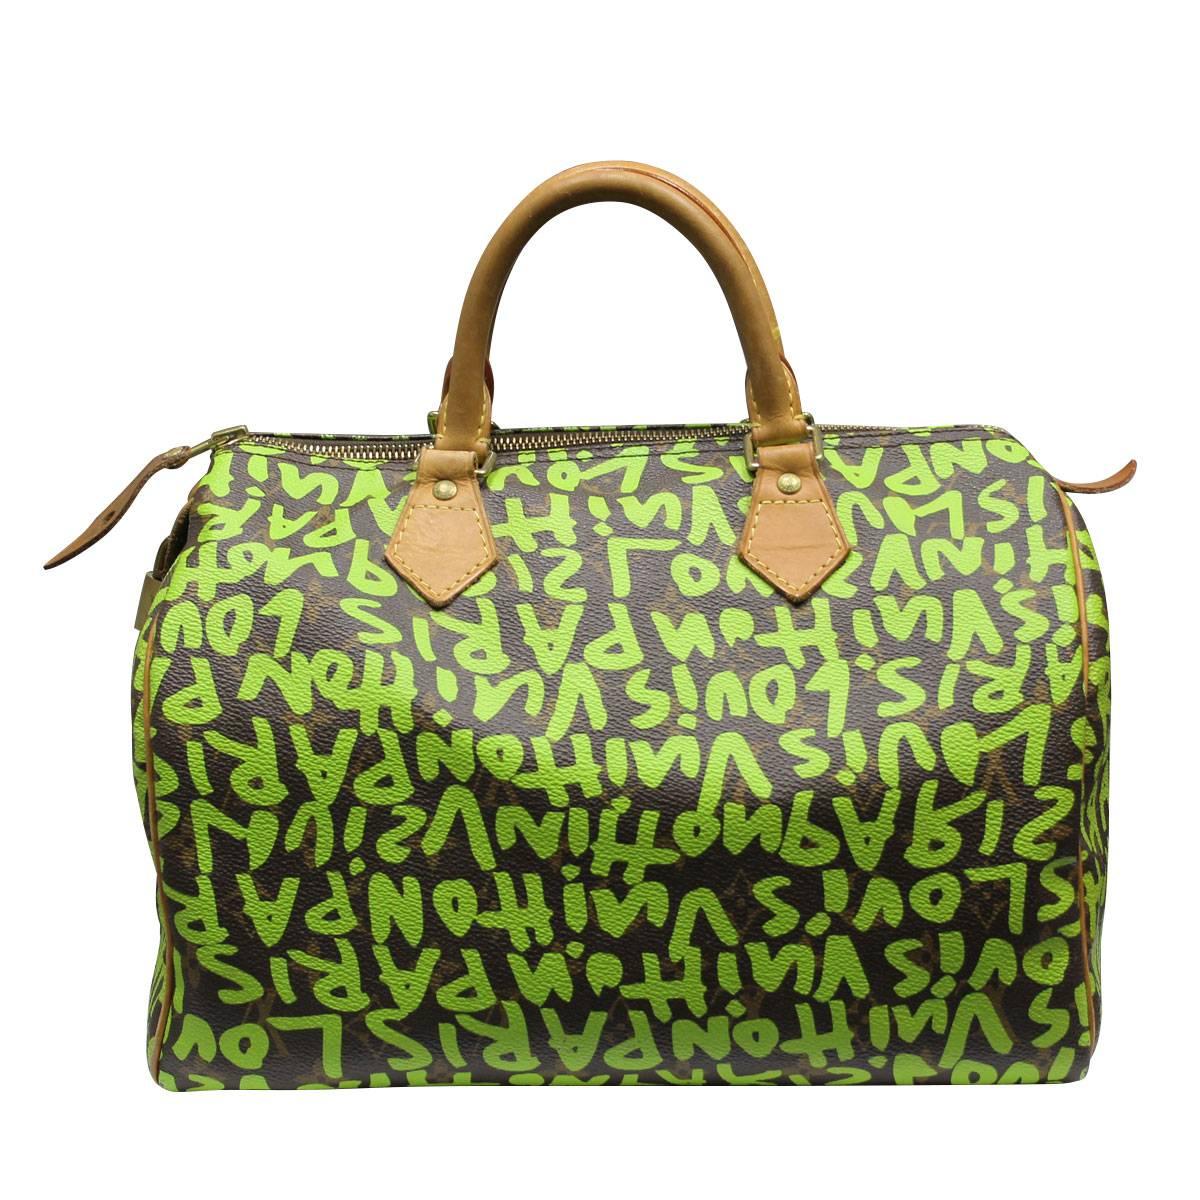 Company: Louis Vuitton
Style: Stephen Sprouse Graffiti Handbag
Handles: Cowhide Leather Rolled Handles; Drop: 3.5